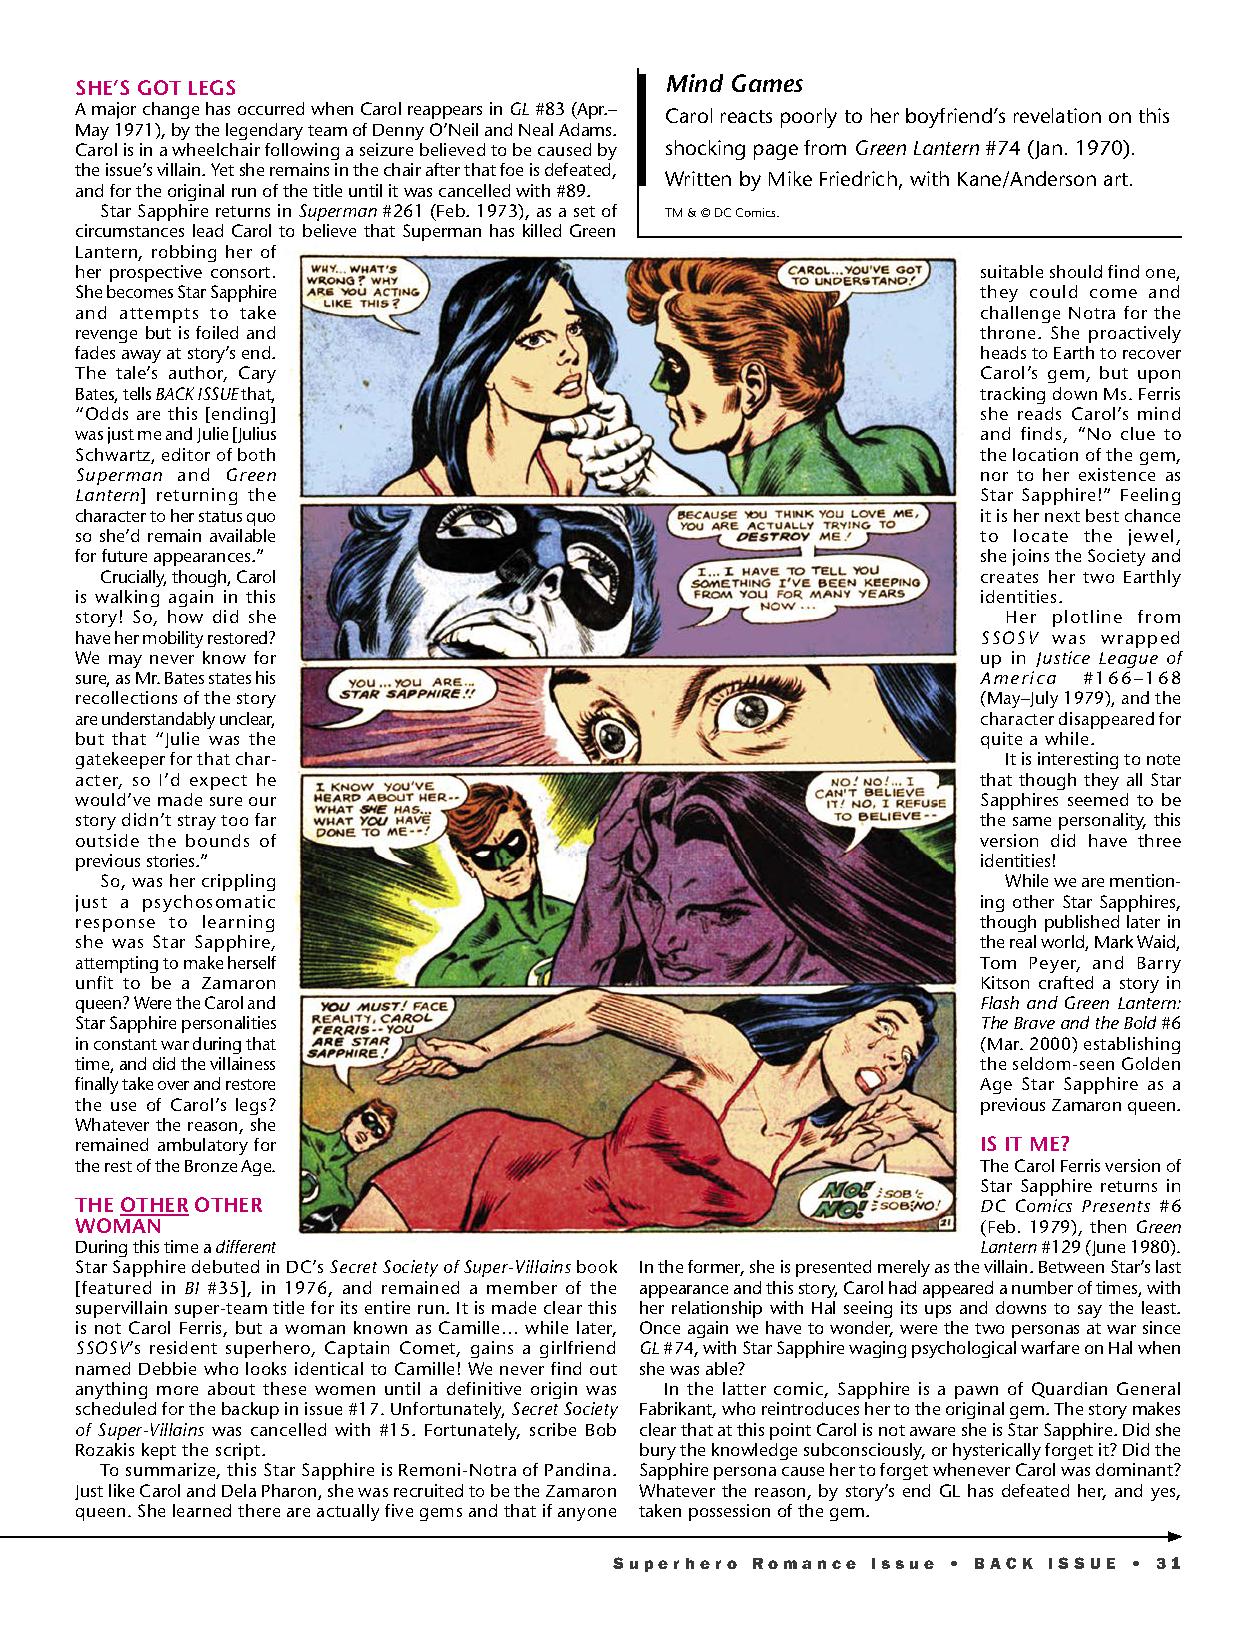 Read online Back Issue comic -  Issue #123 - 33